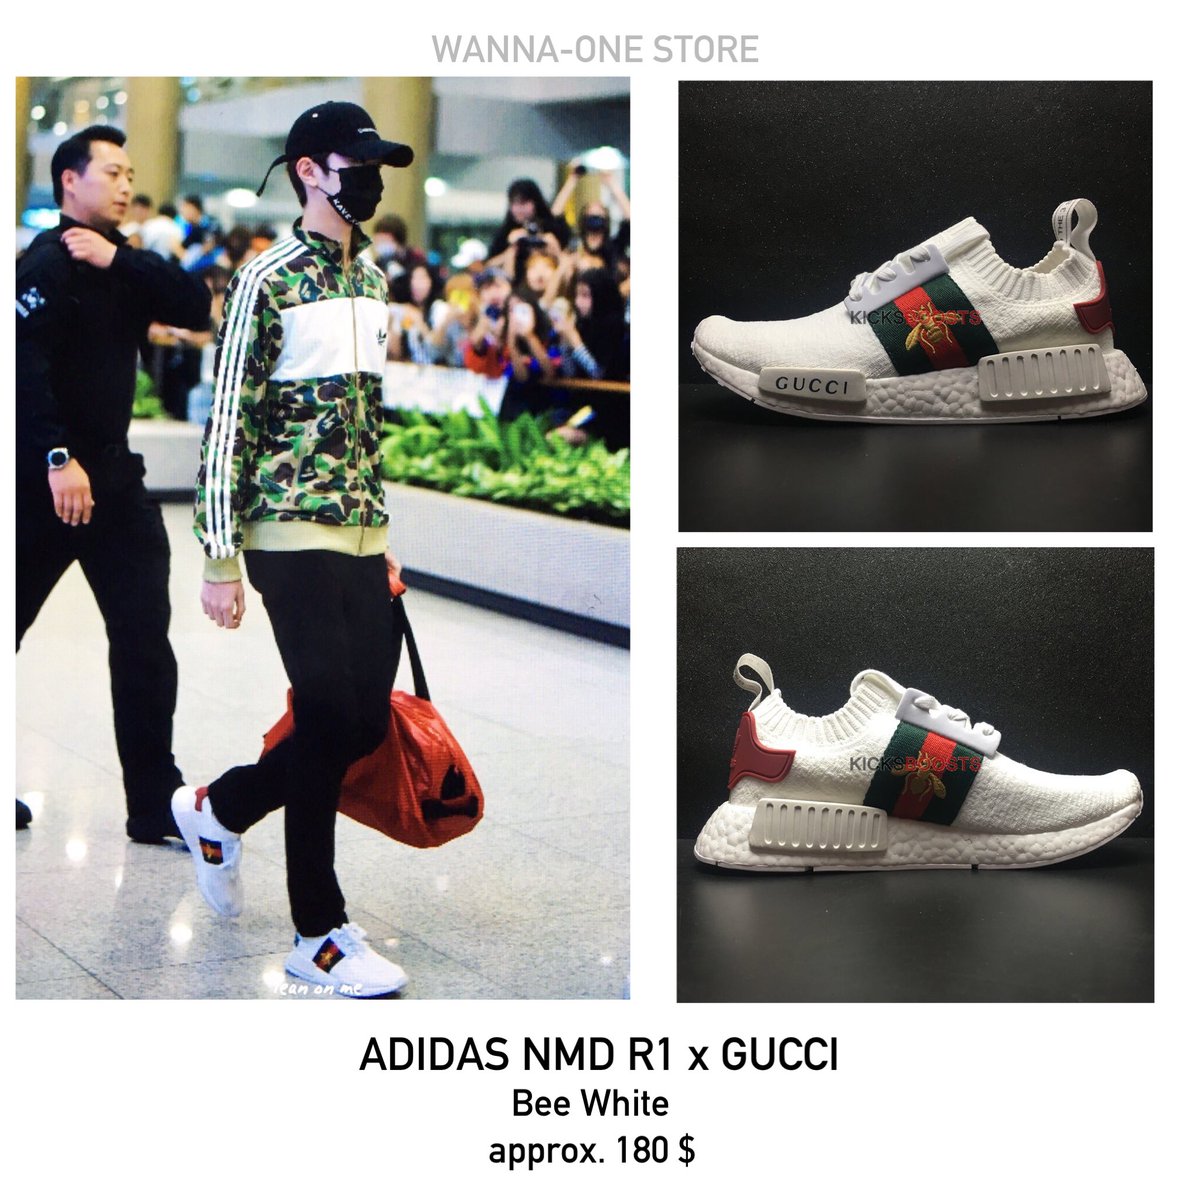 Gucci Nmd Adidas NMD R1 Trainers Exclusive Gucci LV Polo